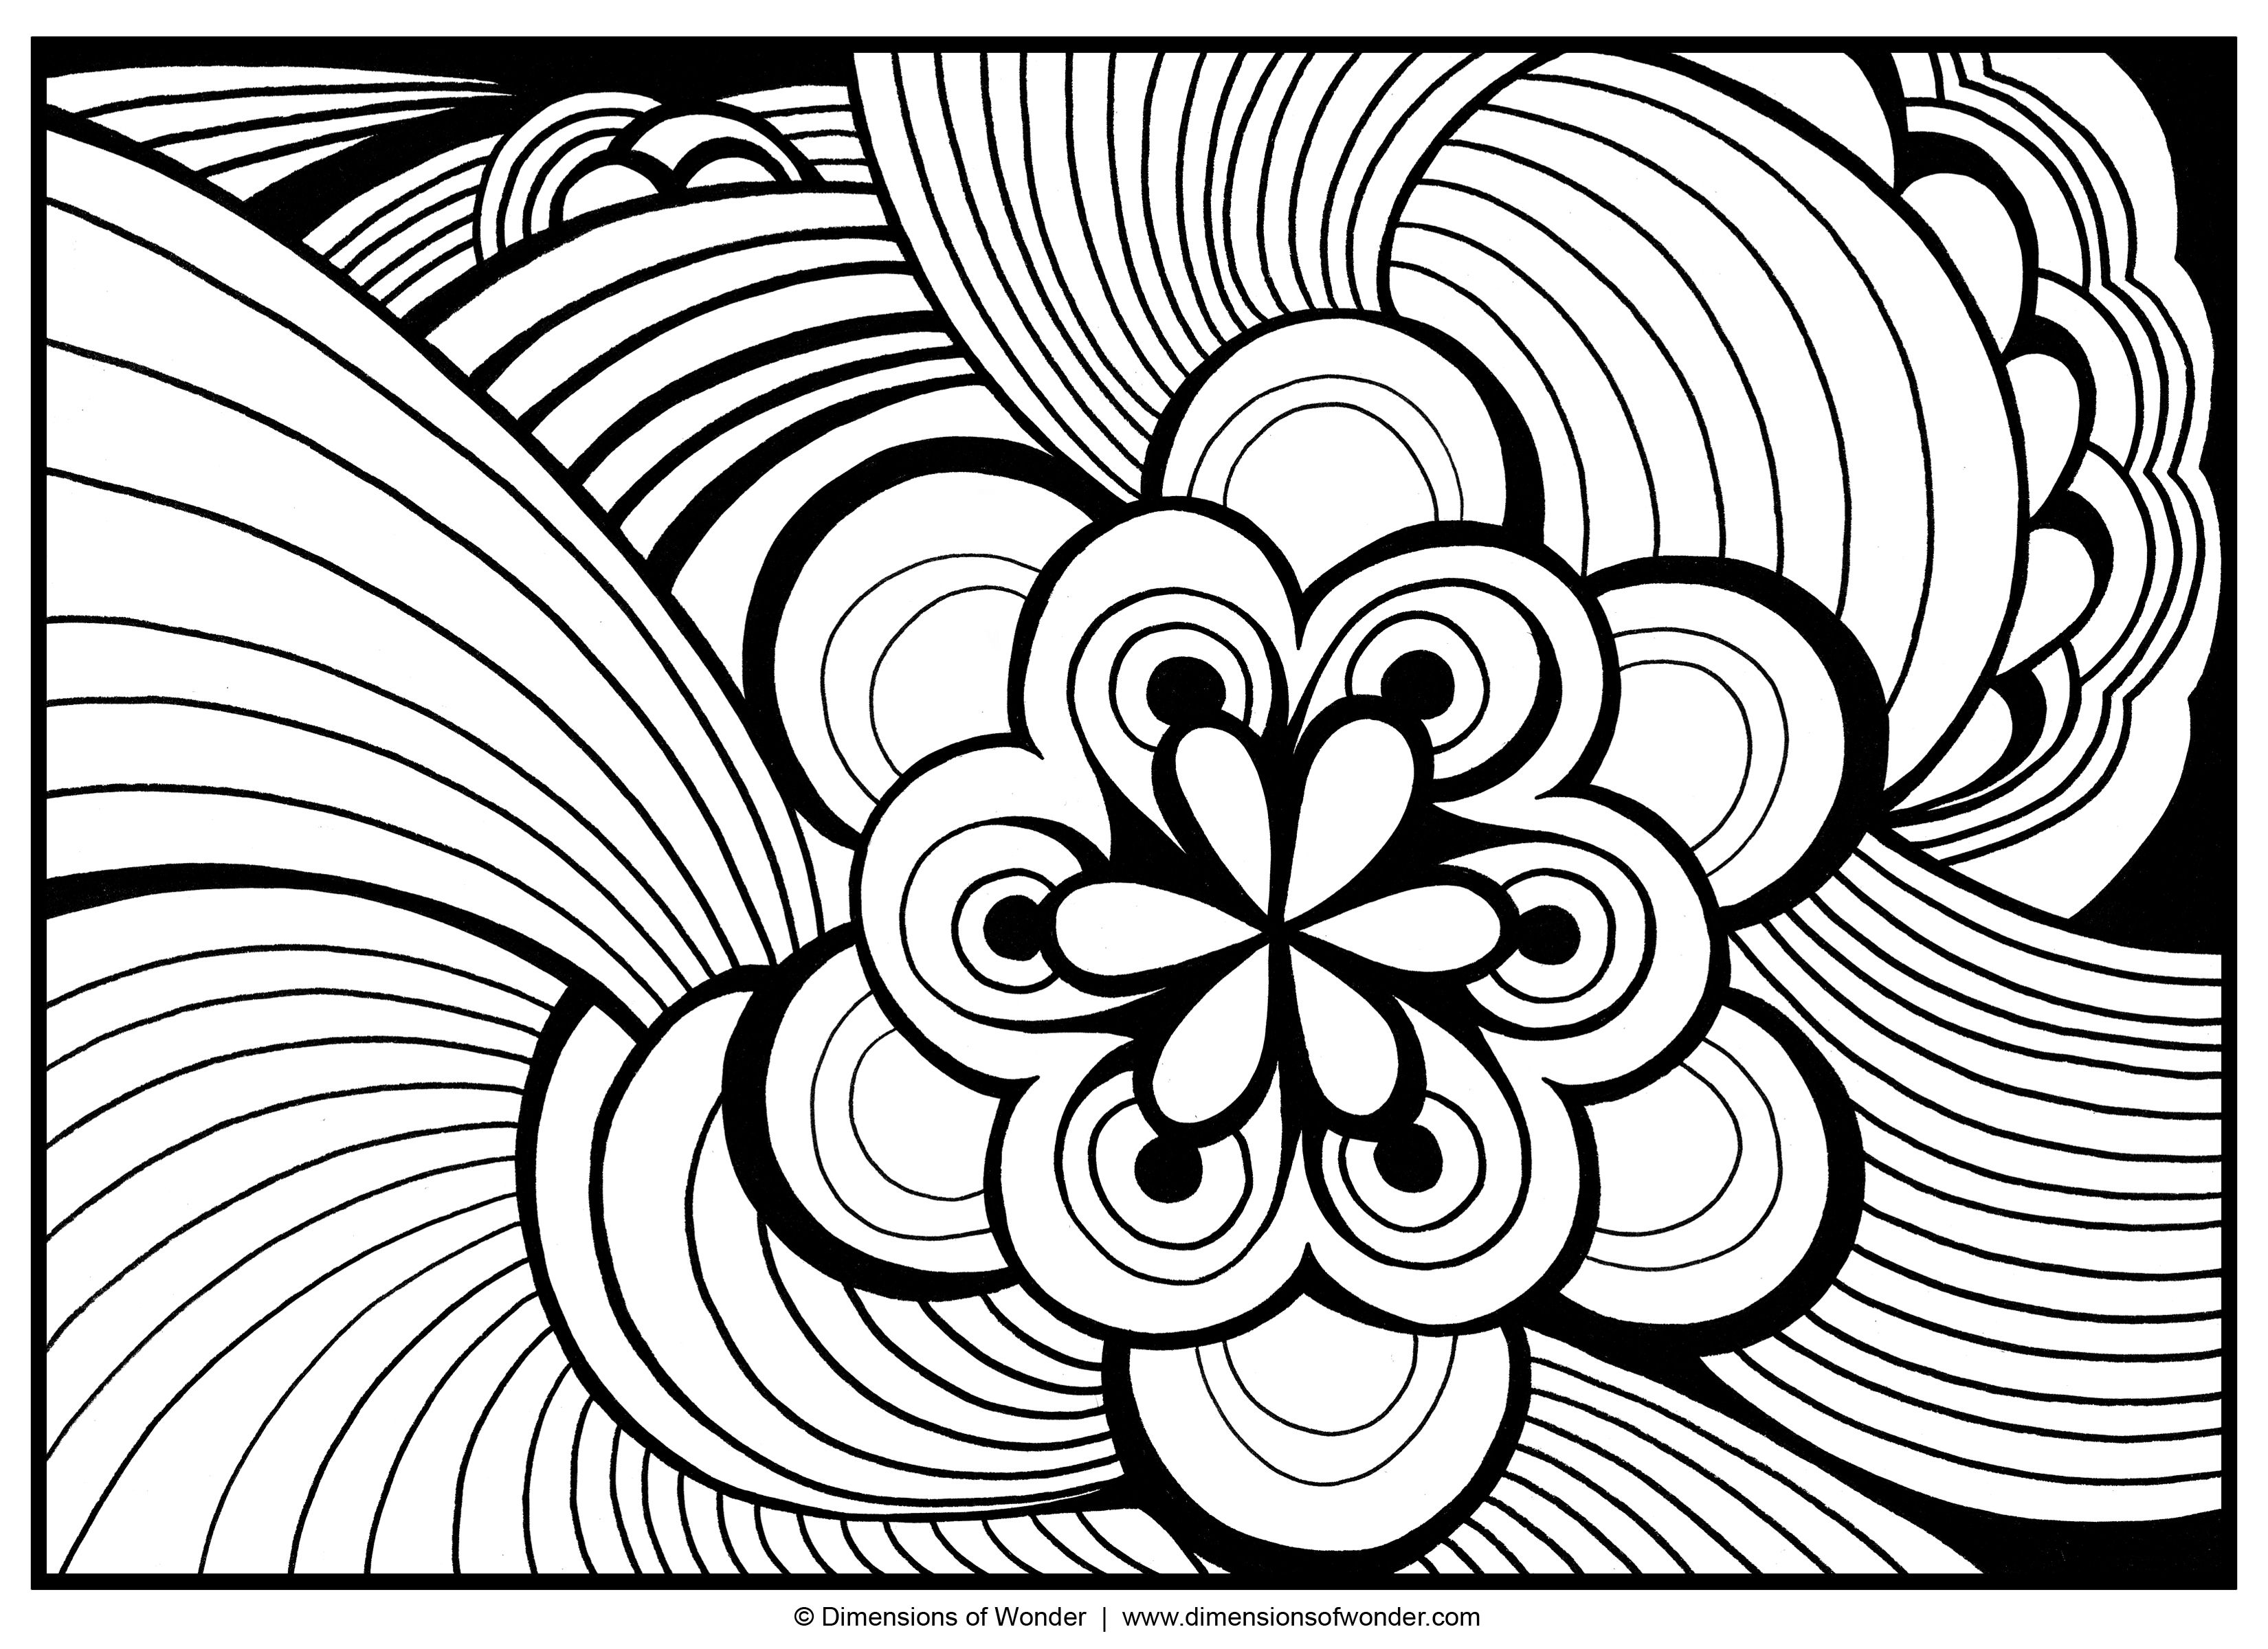 Coloring Pages : Free Art Coloring Pages Download Clip On 8Tebxbqdc - Free Printable Coloring Designs For Adults